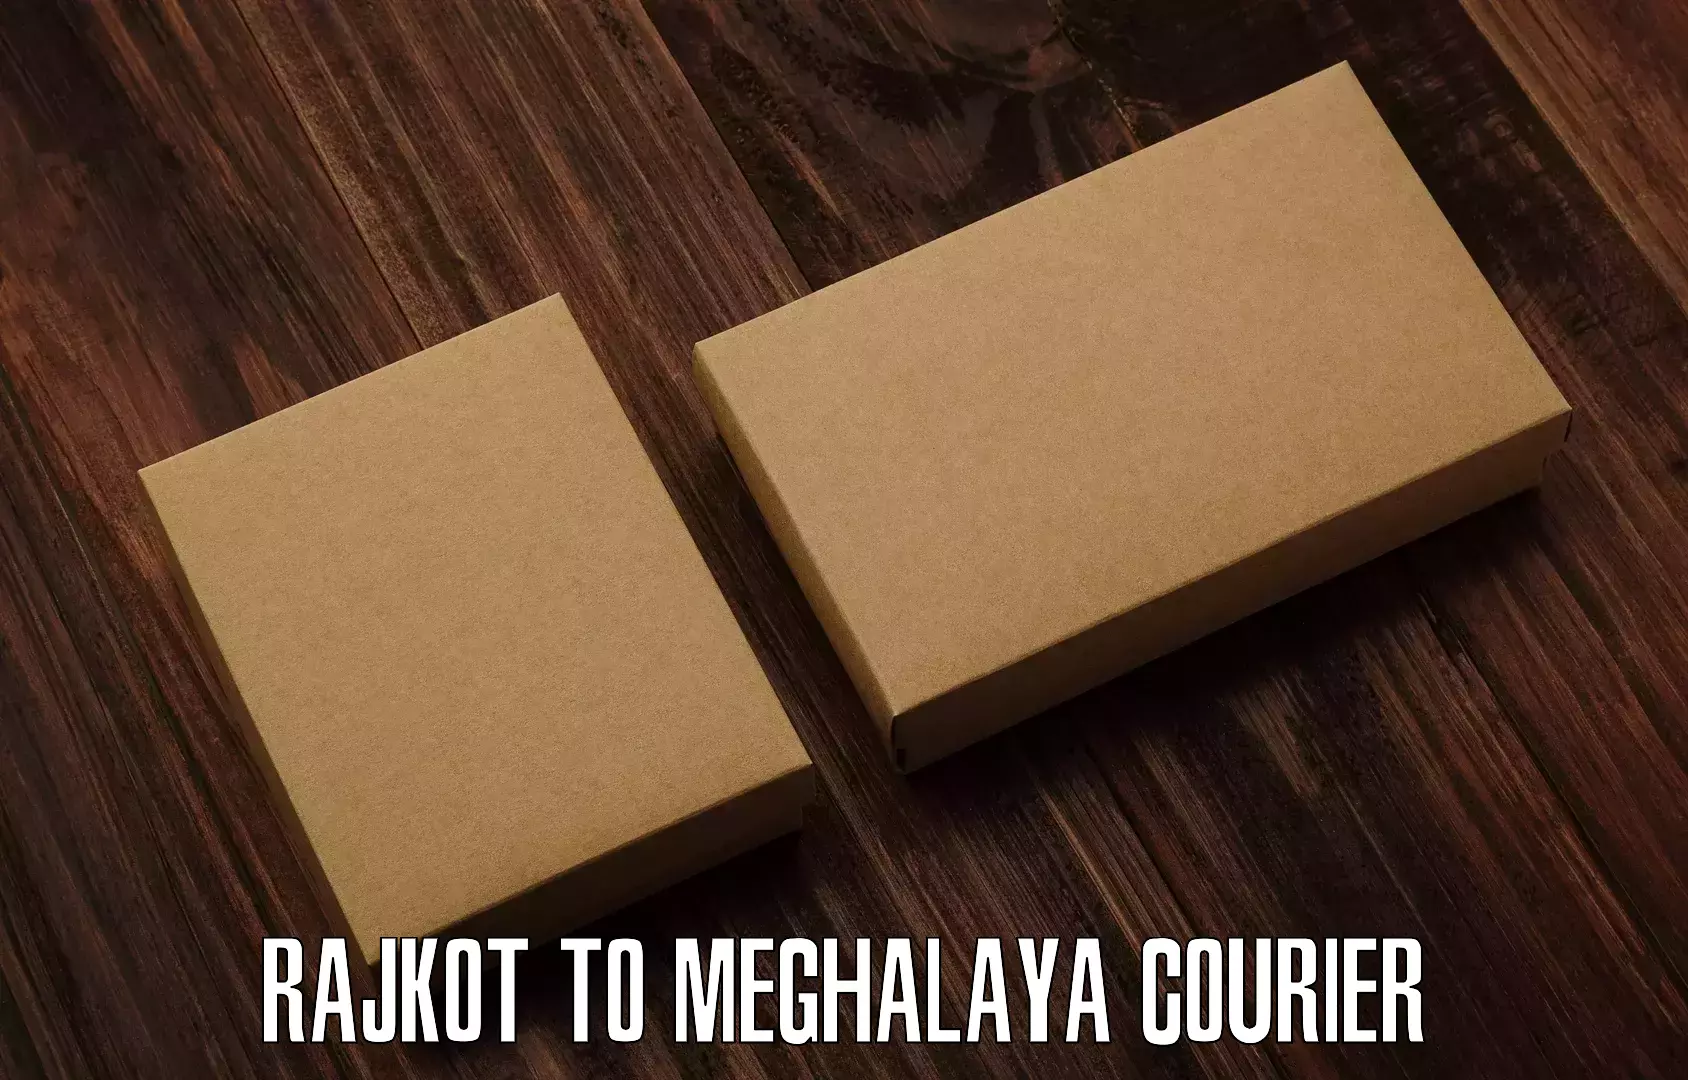 Courier service comparison in Rajkot to Meghalaya